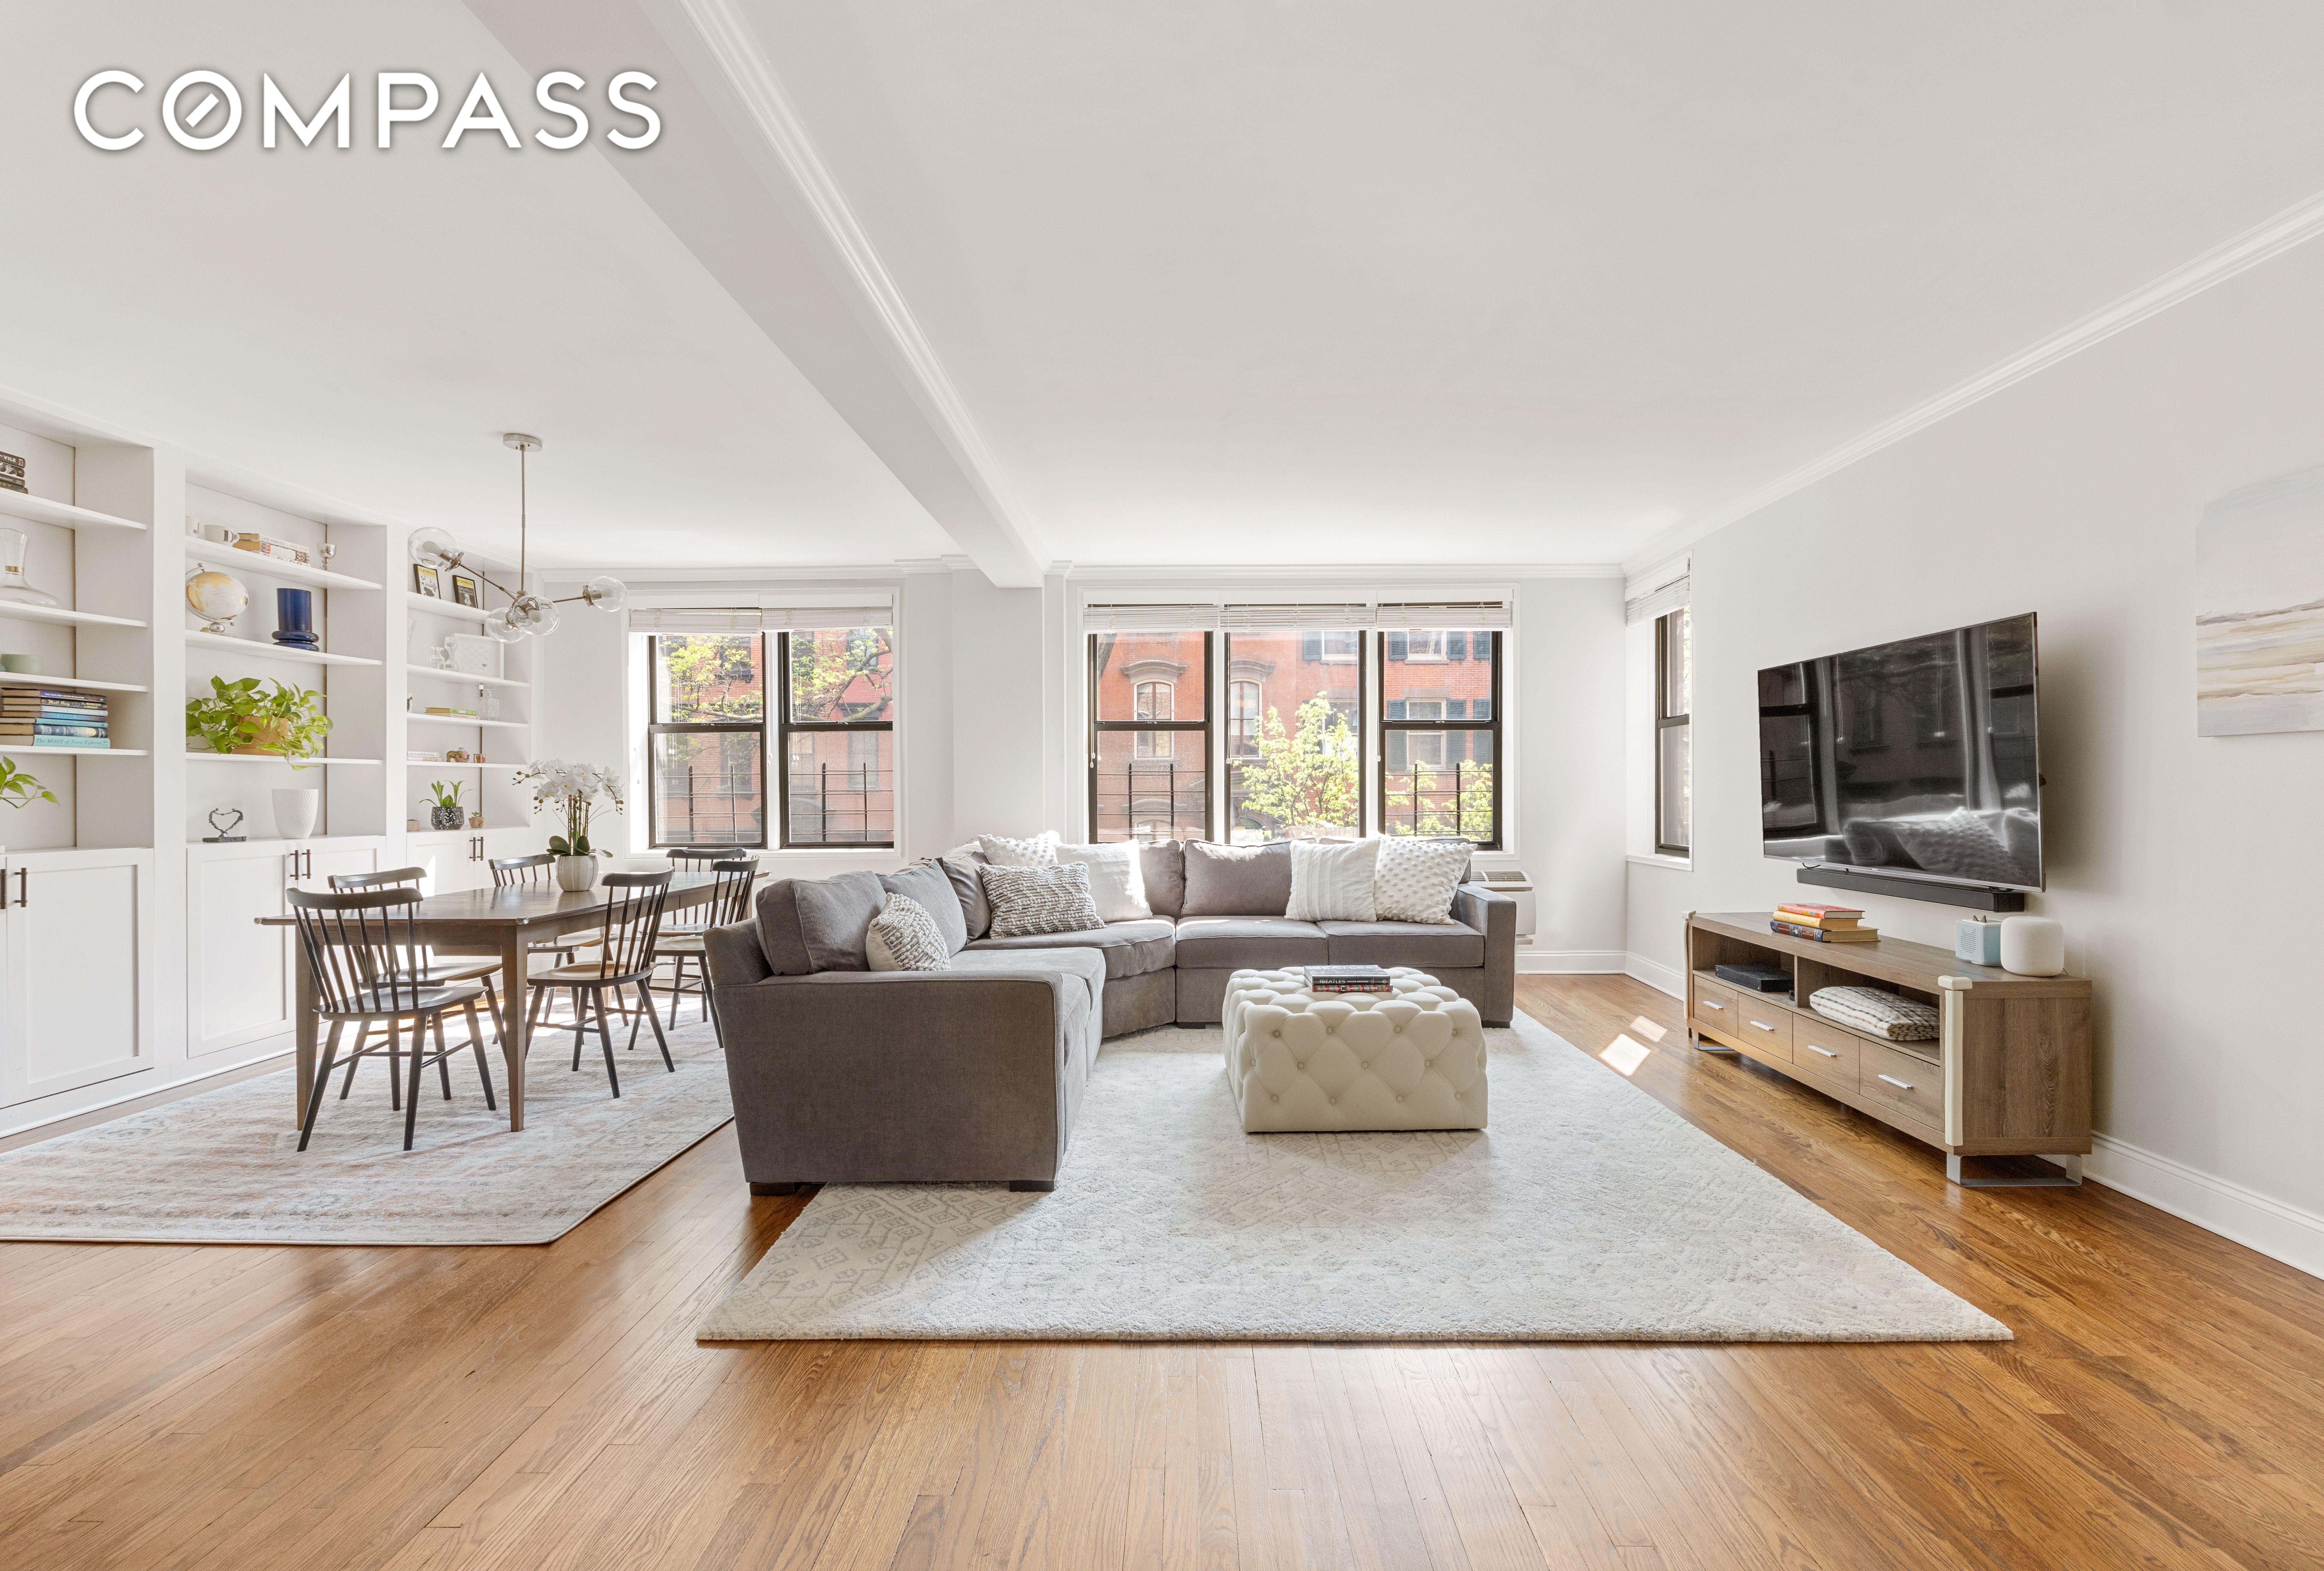 211 East 18th Street 2No, Gramercy Park, Downtown, NYC - 2 Bedrooms  
2 Bathrooms  
7 Rooms - 